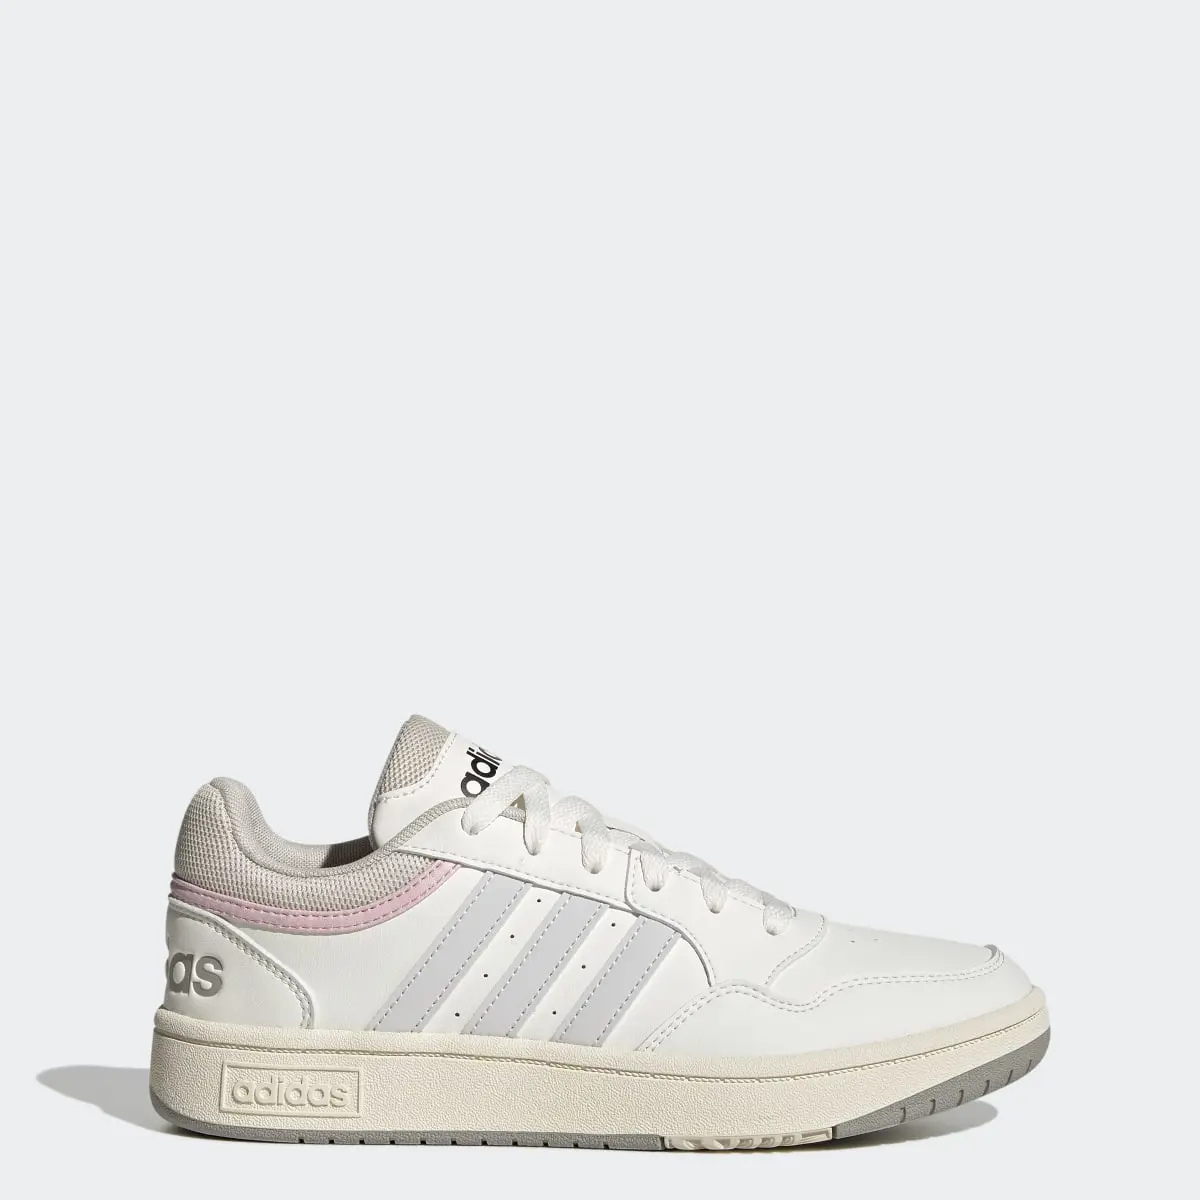 Adidas Hoops 3.0 Mid Lifestyle Basketball Low Schuh. 1